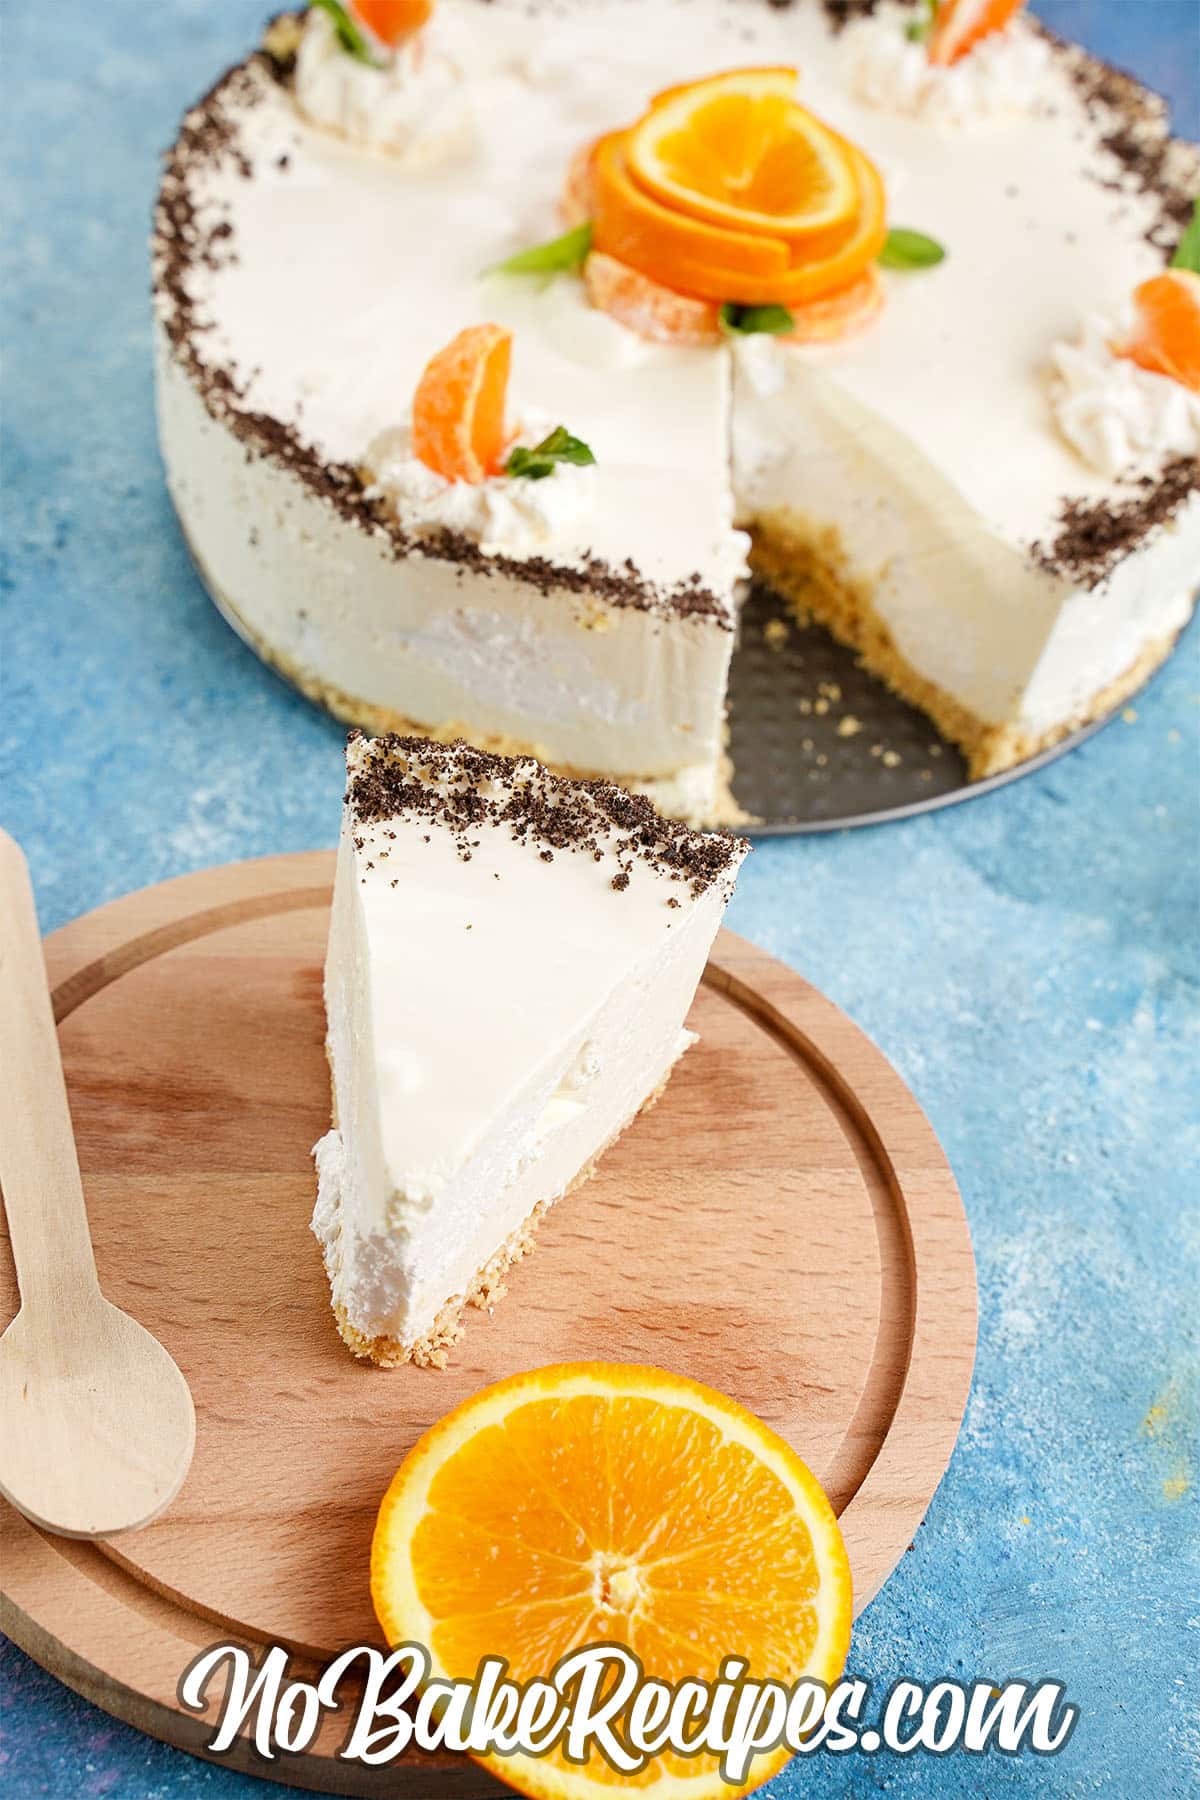 slice of orange cheesecake on a plate with the whole cheesecake behind it